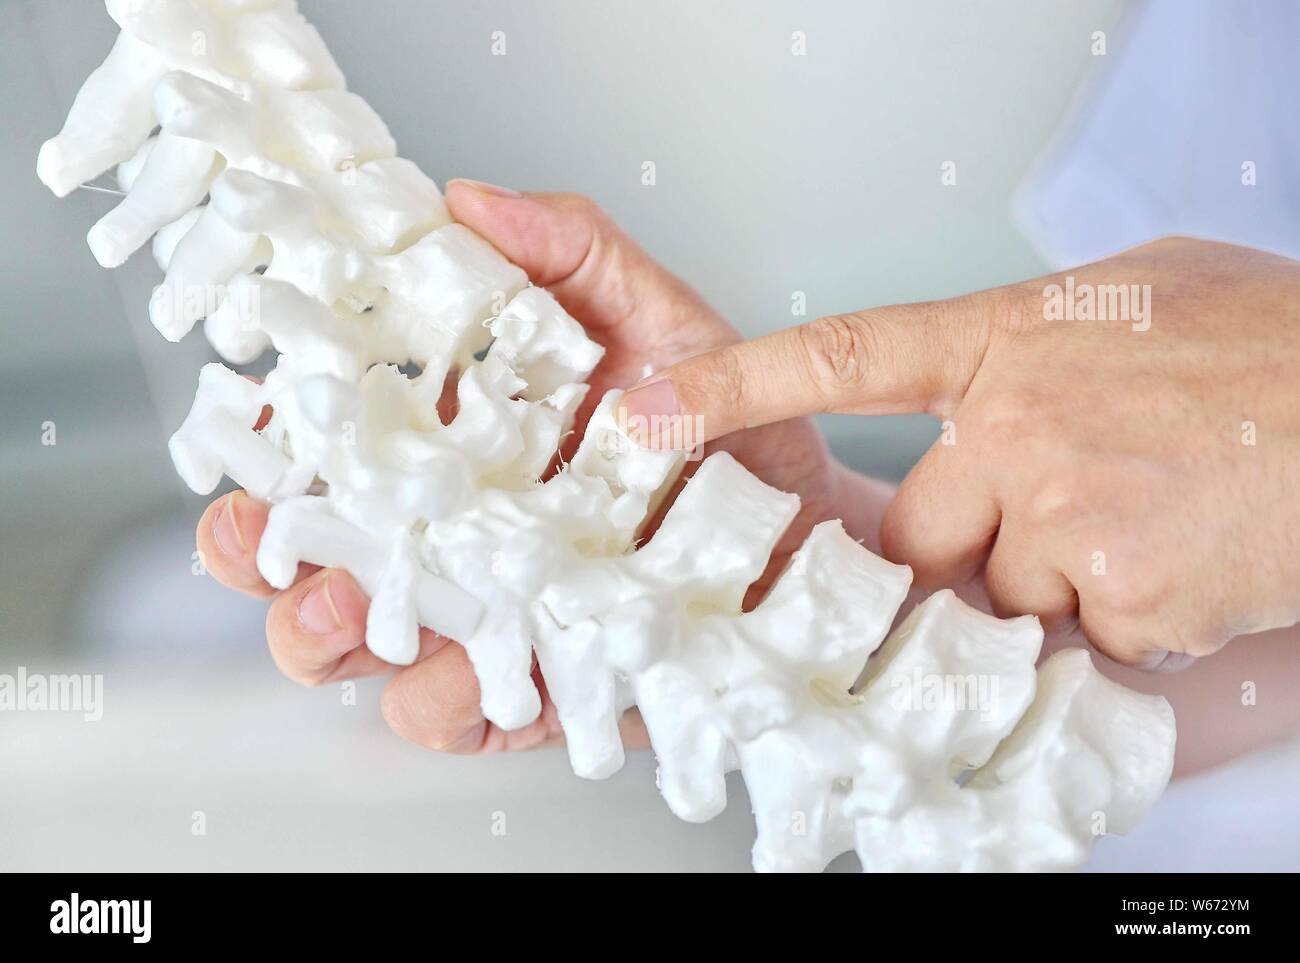 A doctor shows a 3D-printed model used for thoracic orthopedic surgery at First Hospital of Qinhuangdao in Qinhuangdao city, east China's Hebei provin Stock Photo